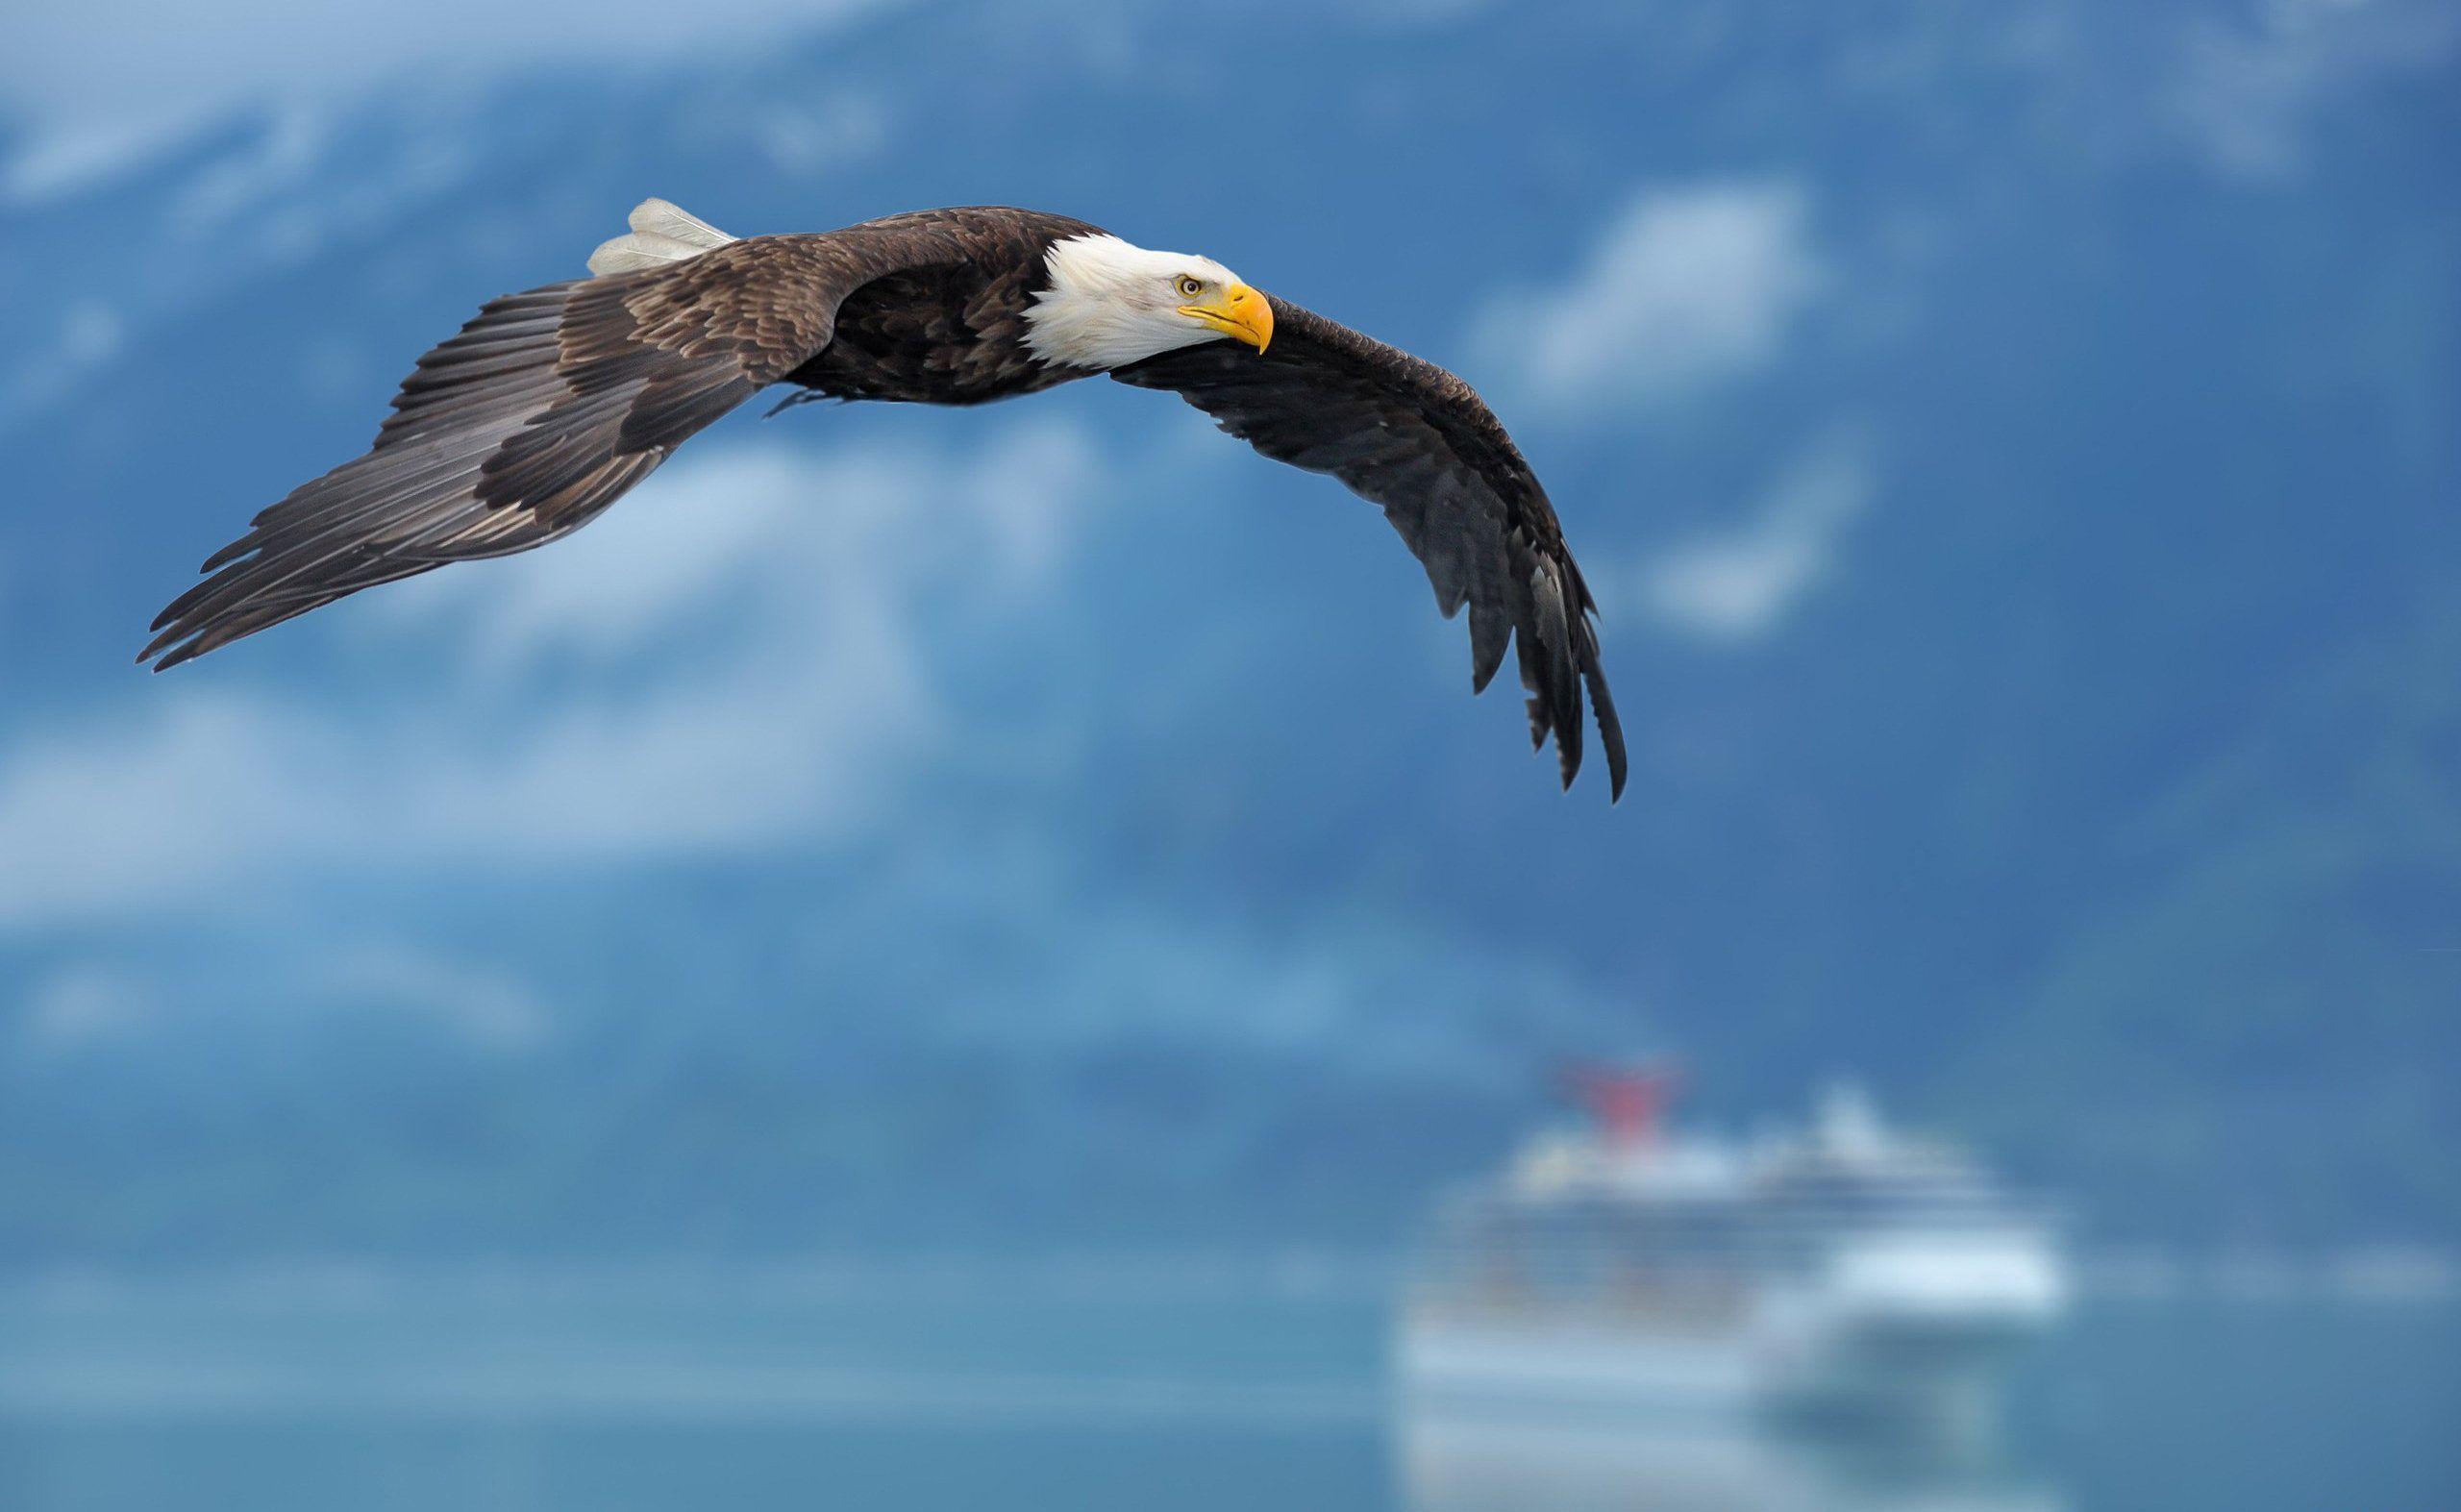 Download Bald Eagle Wallpaper 5454 2560x1573 px High Resolution